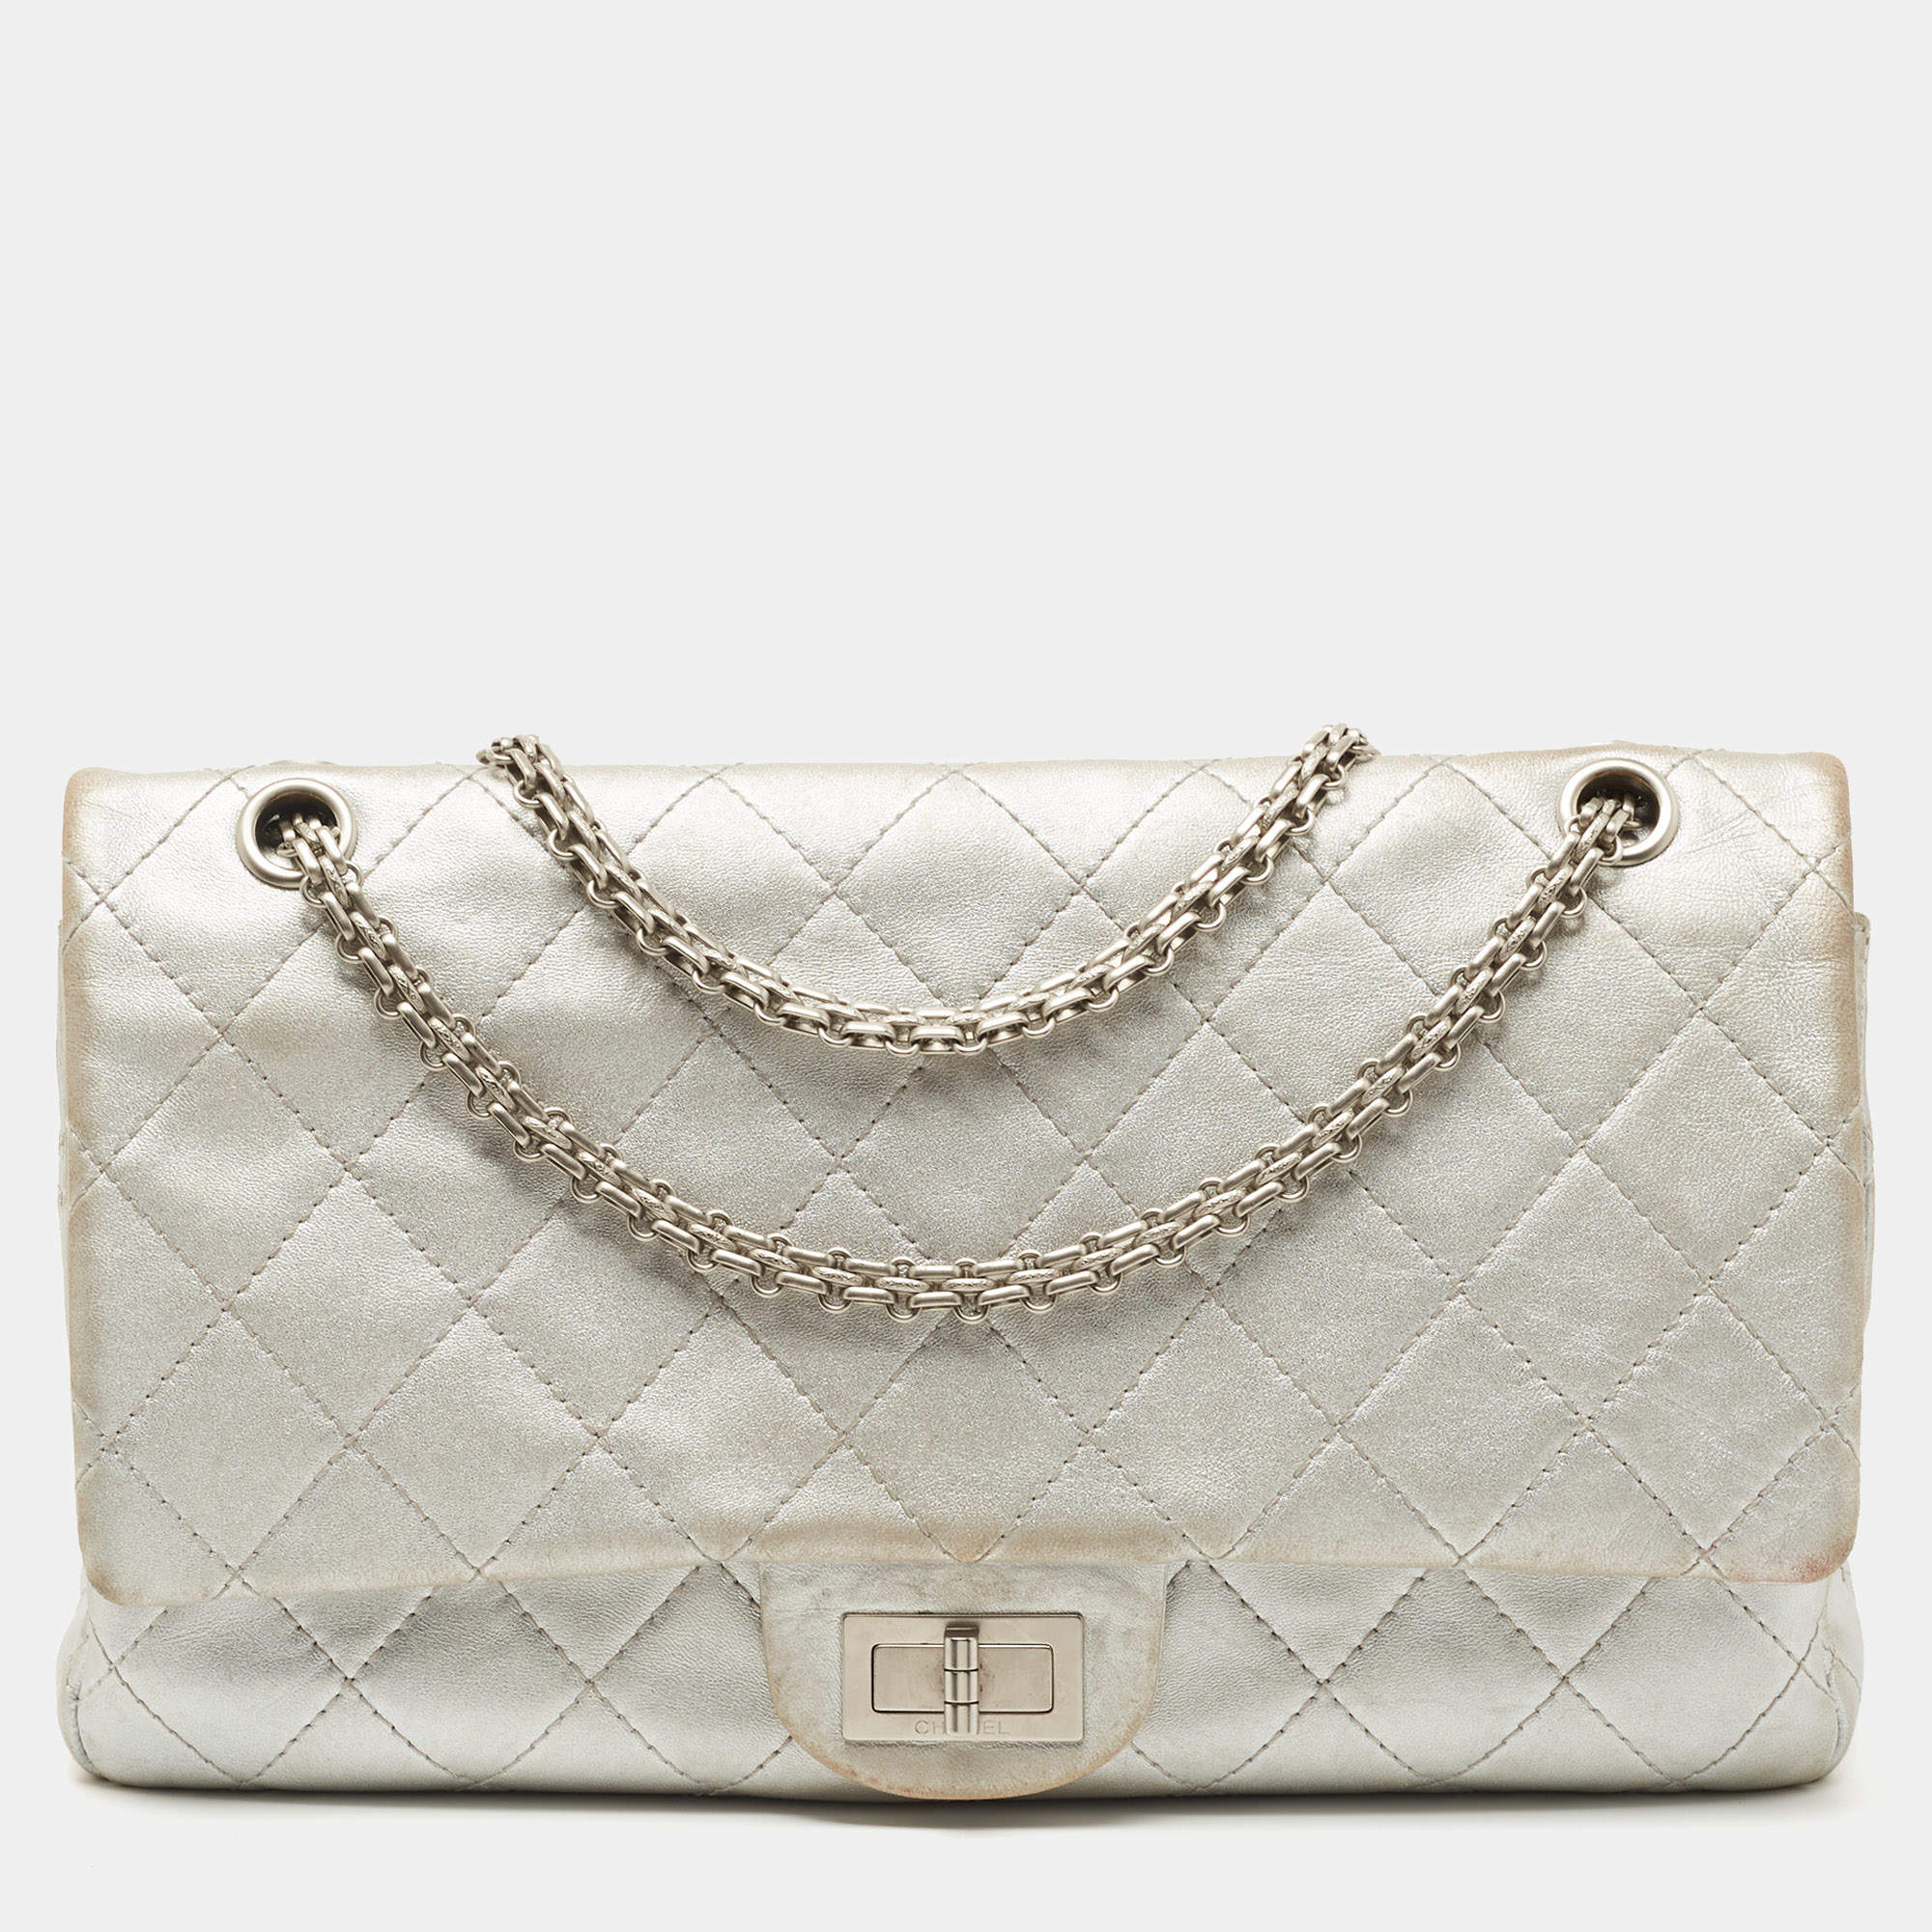 Chanel Silver Quilted Leather Reissue 2.55 Classic 227 Flap Bag Chanel